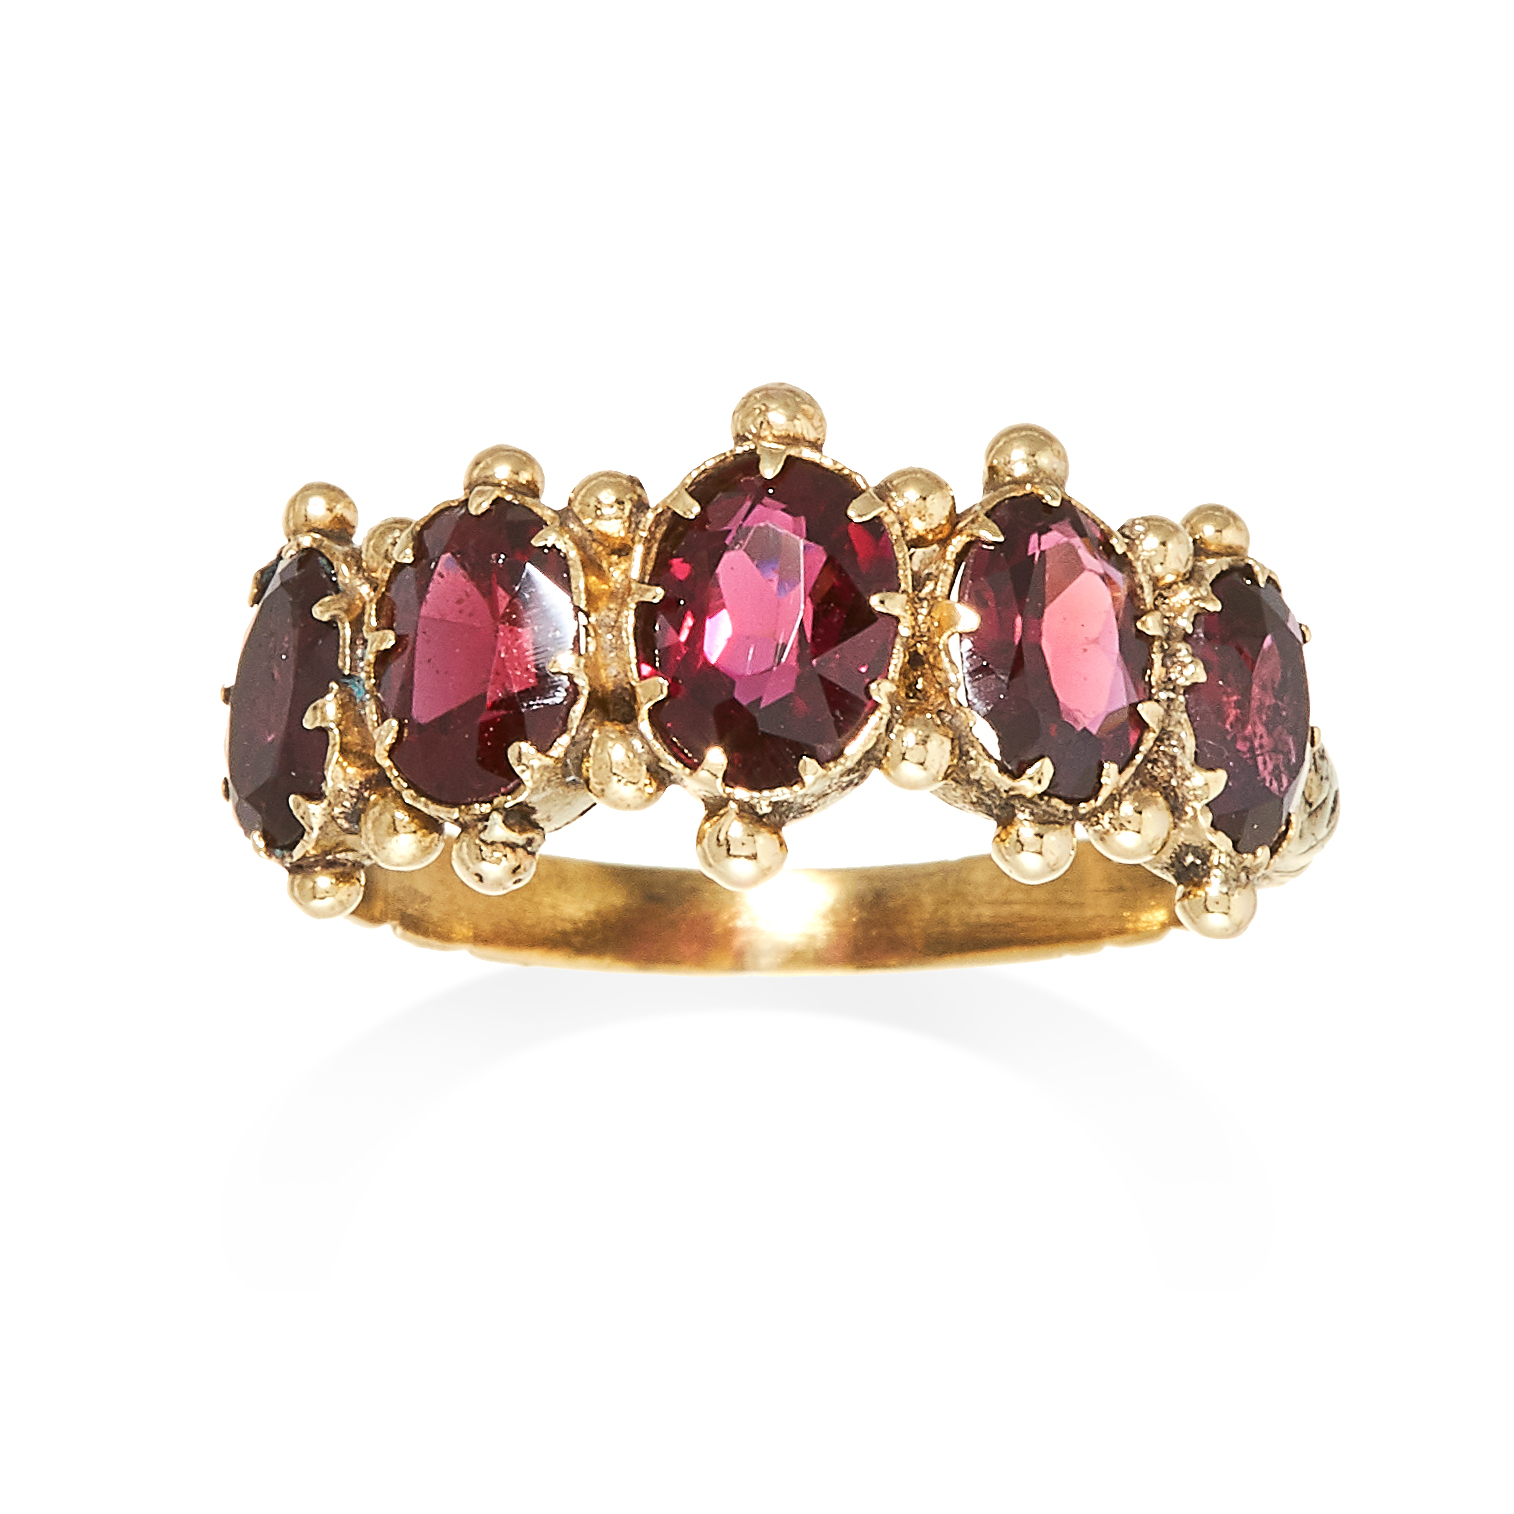 AN ANTIQUE GARNET FIVE STONE RING in yellow gold, comprising of five oval cut garnets with